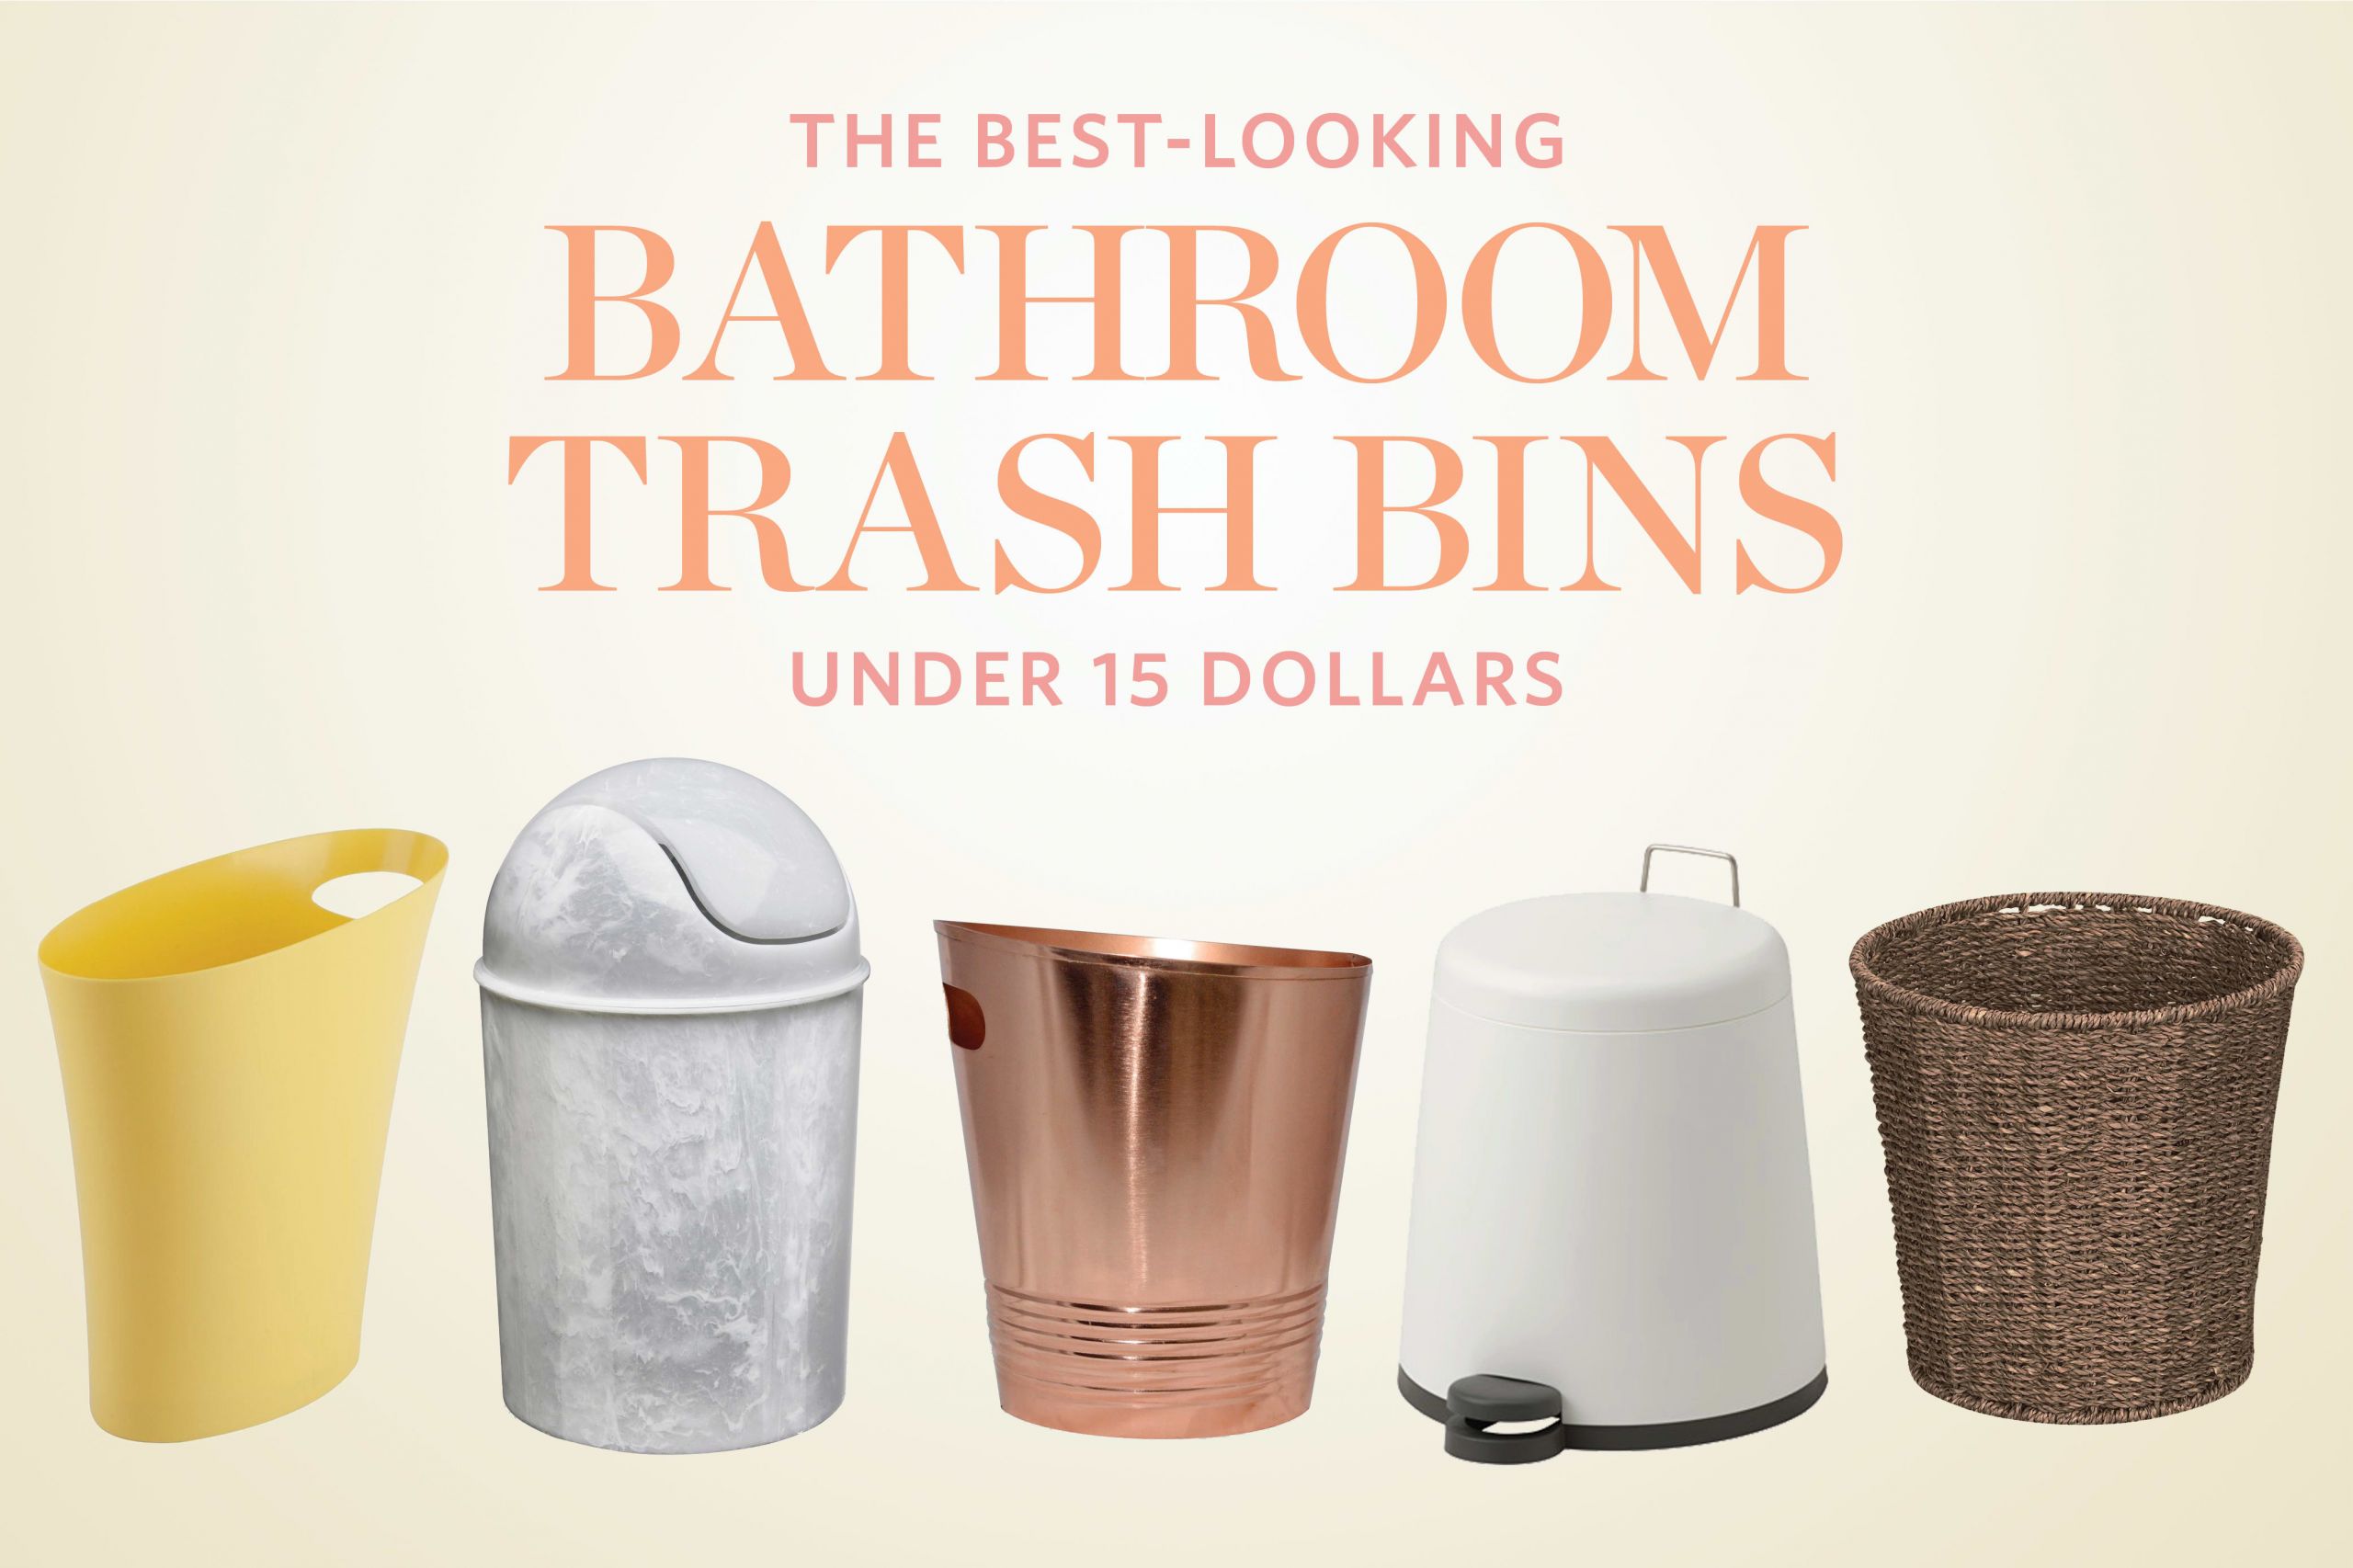 Small Bathroom Garbage Cans
 The Best Looking Bathroom Trash Cans Under $15